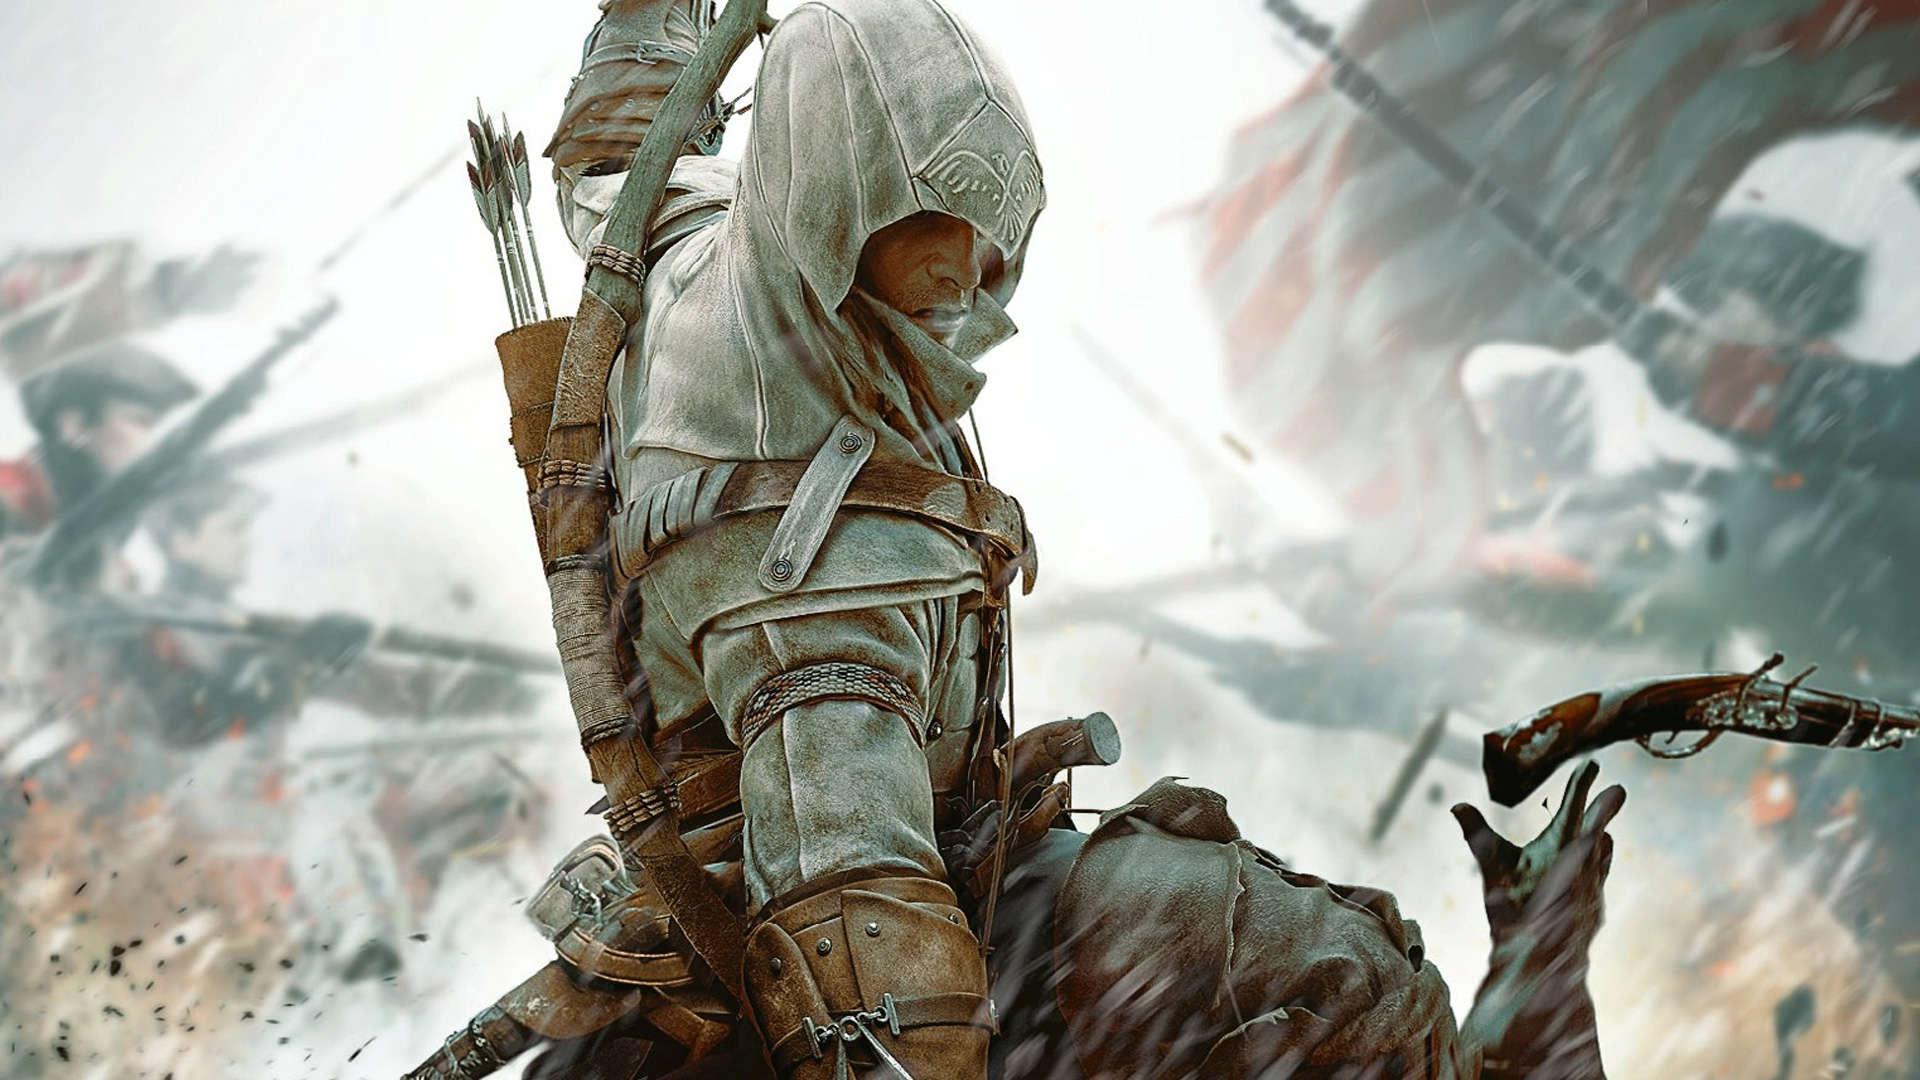 Assassin S Creed Wallpaper In HD